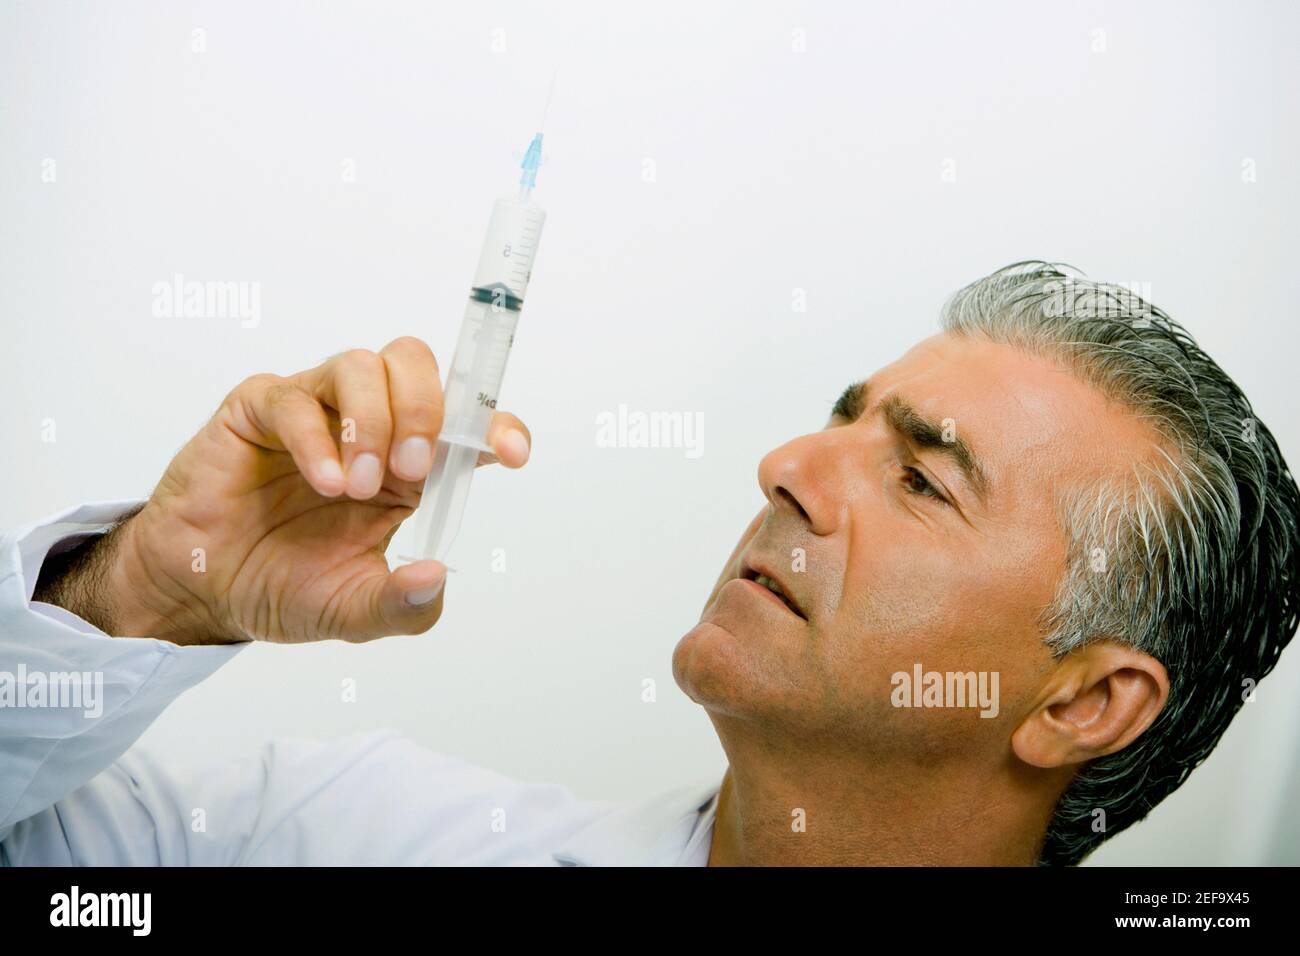 Close-up of a male doctor holding a syringe Banque D'Images